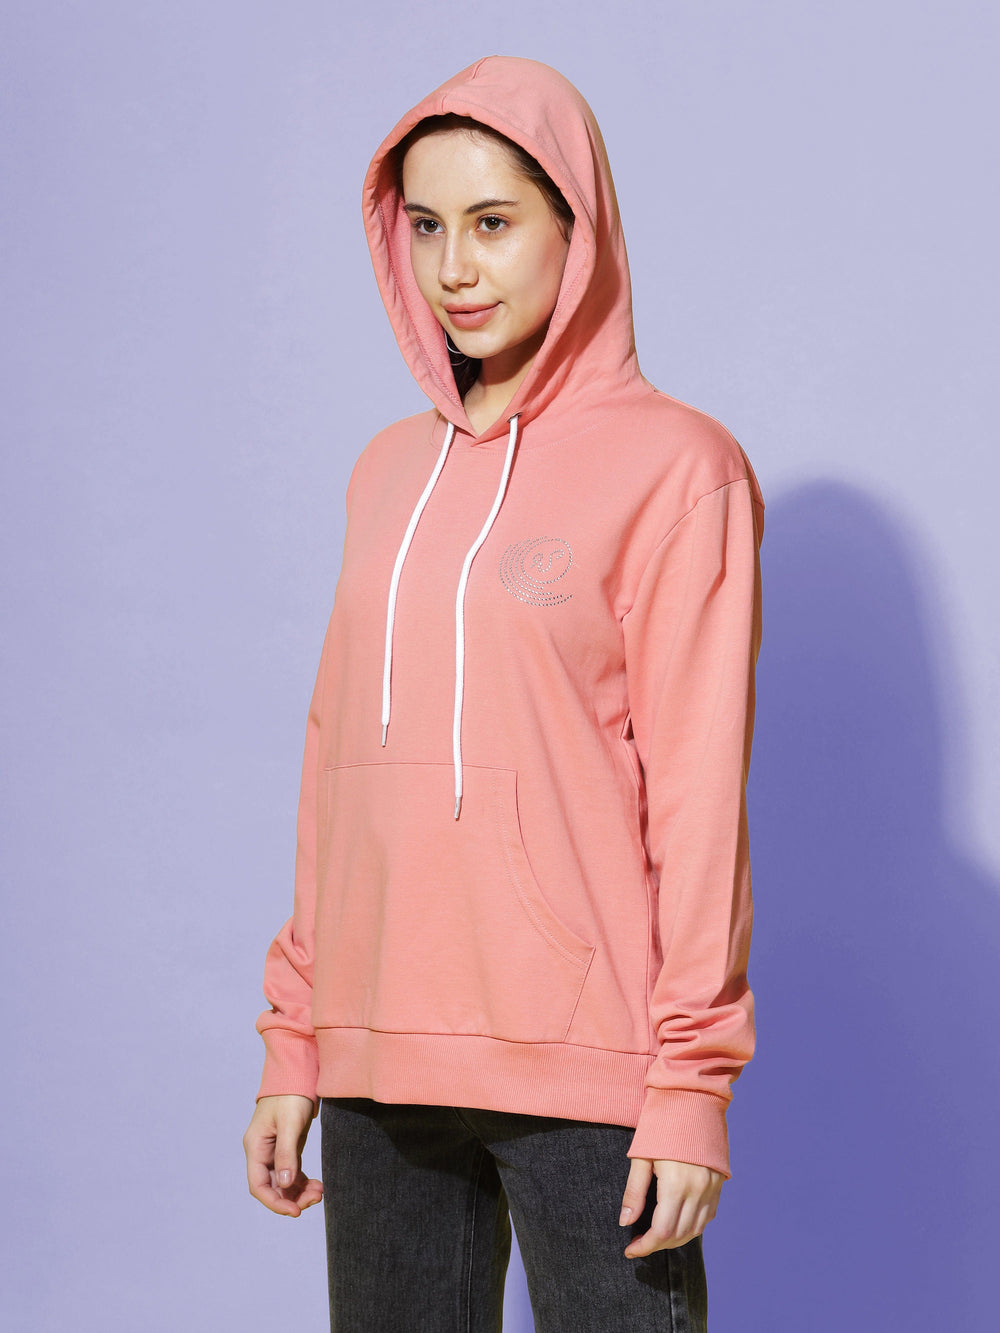  Hoodies  Shop the Latest Trends: Solid Peach Hoodies for Women - 9shines Label- 9shines label 